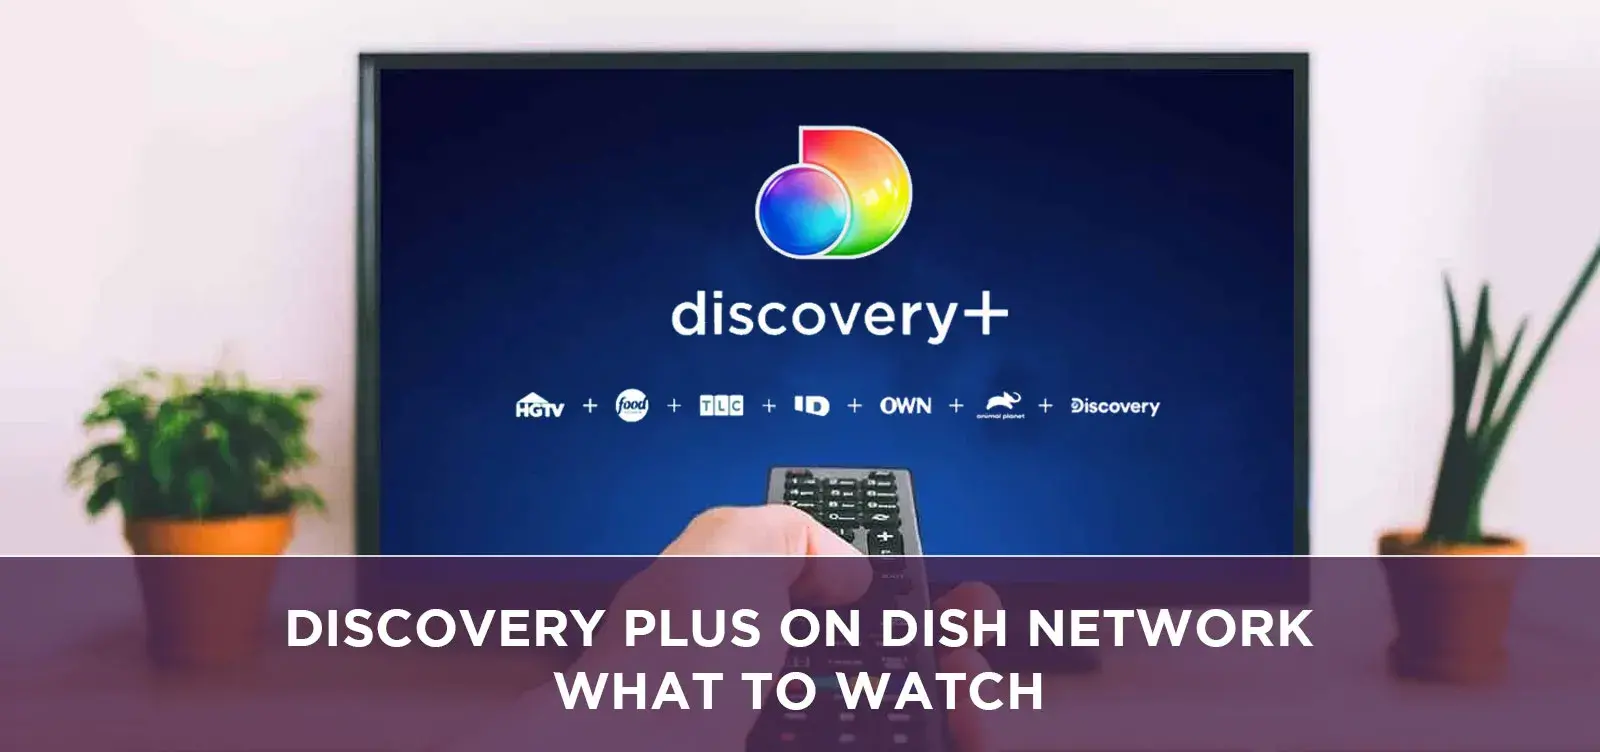 Discovery Plus ON DISH Network WHAT TO WATCH